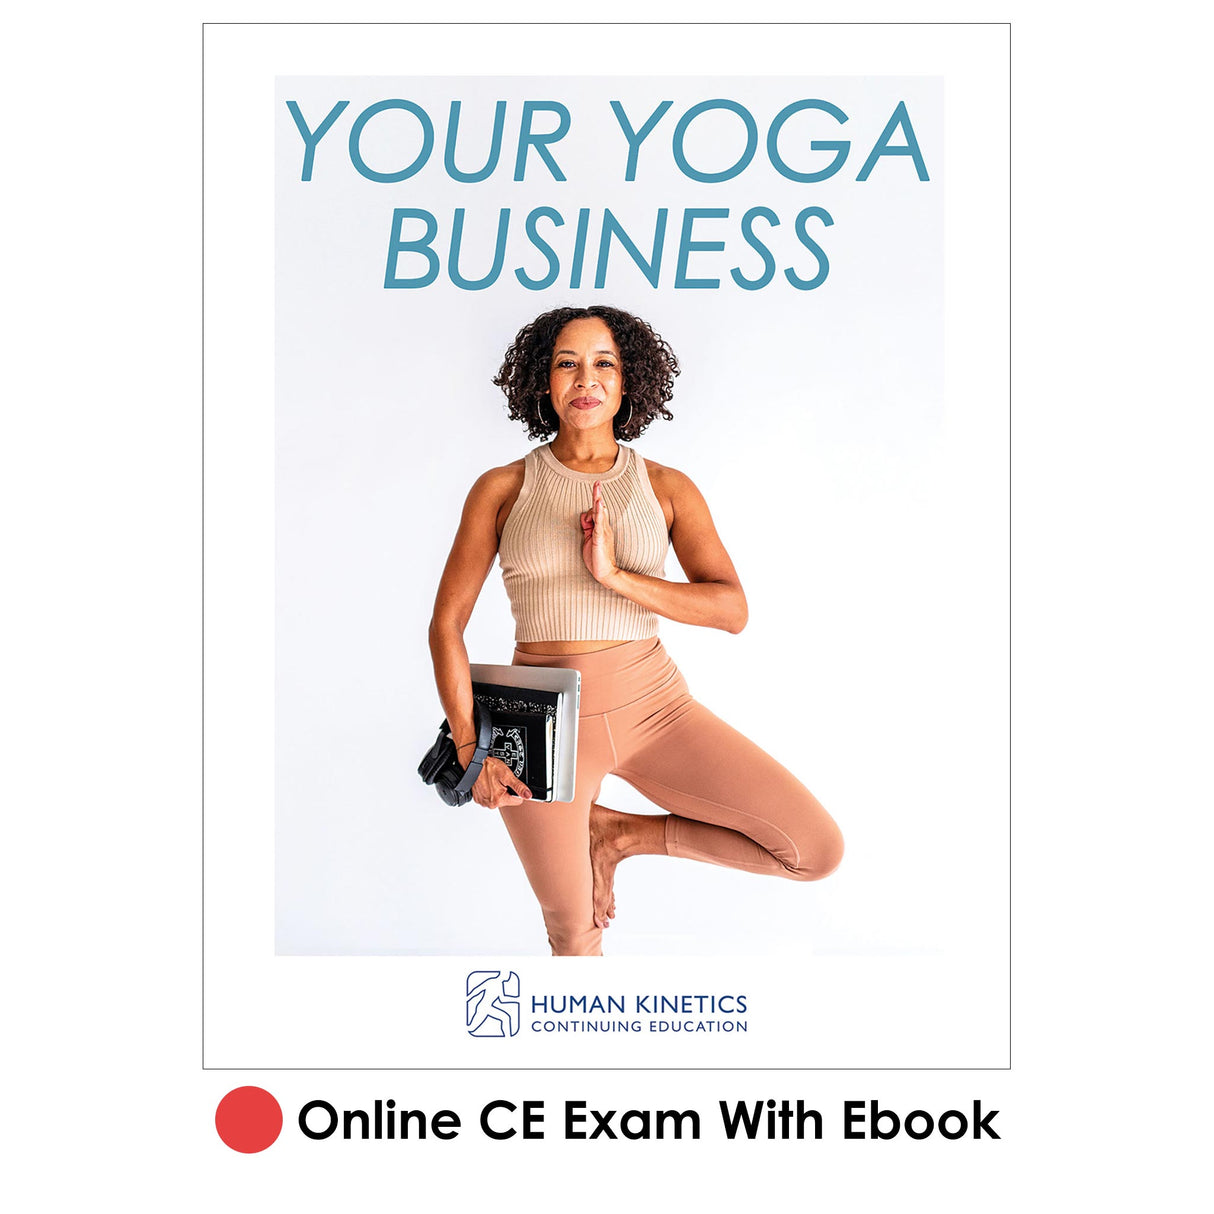 Your Yoga Business Online CE Exam With Ebook